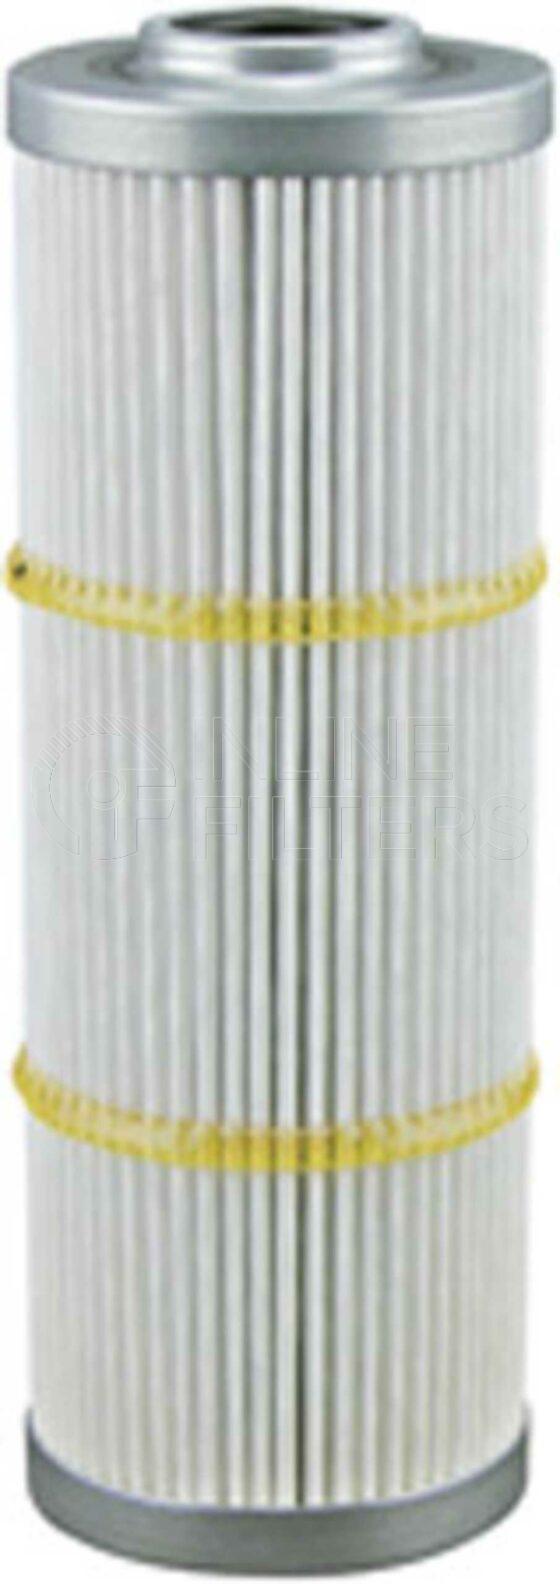 Inline FH50619. Hydraulic Filter Product – Cartridge – O- Ring Product Hydraulic filter product